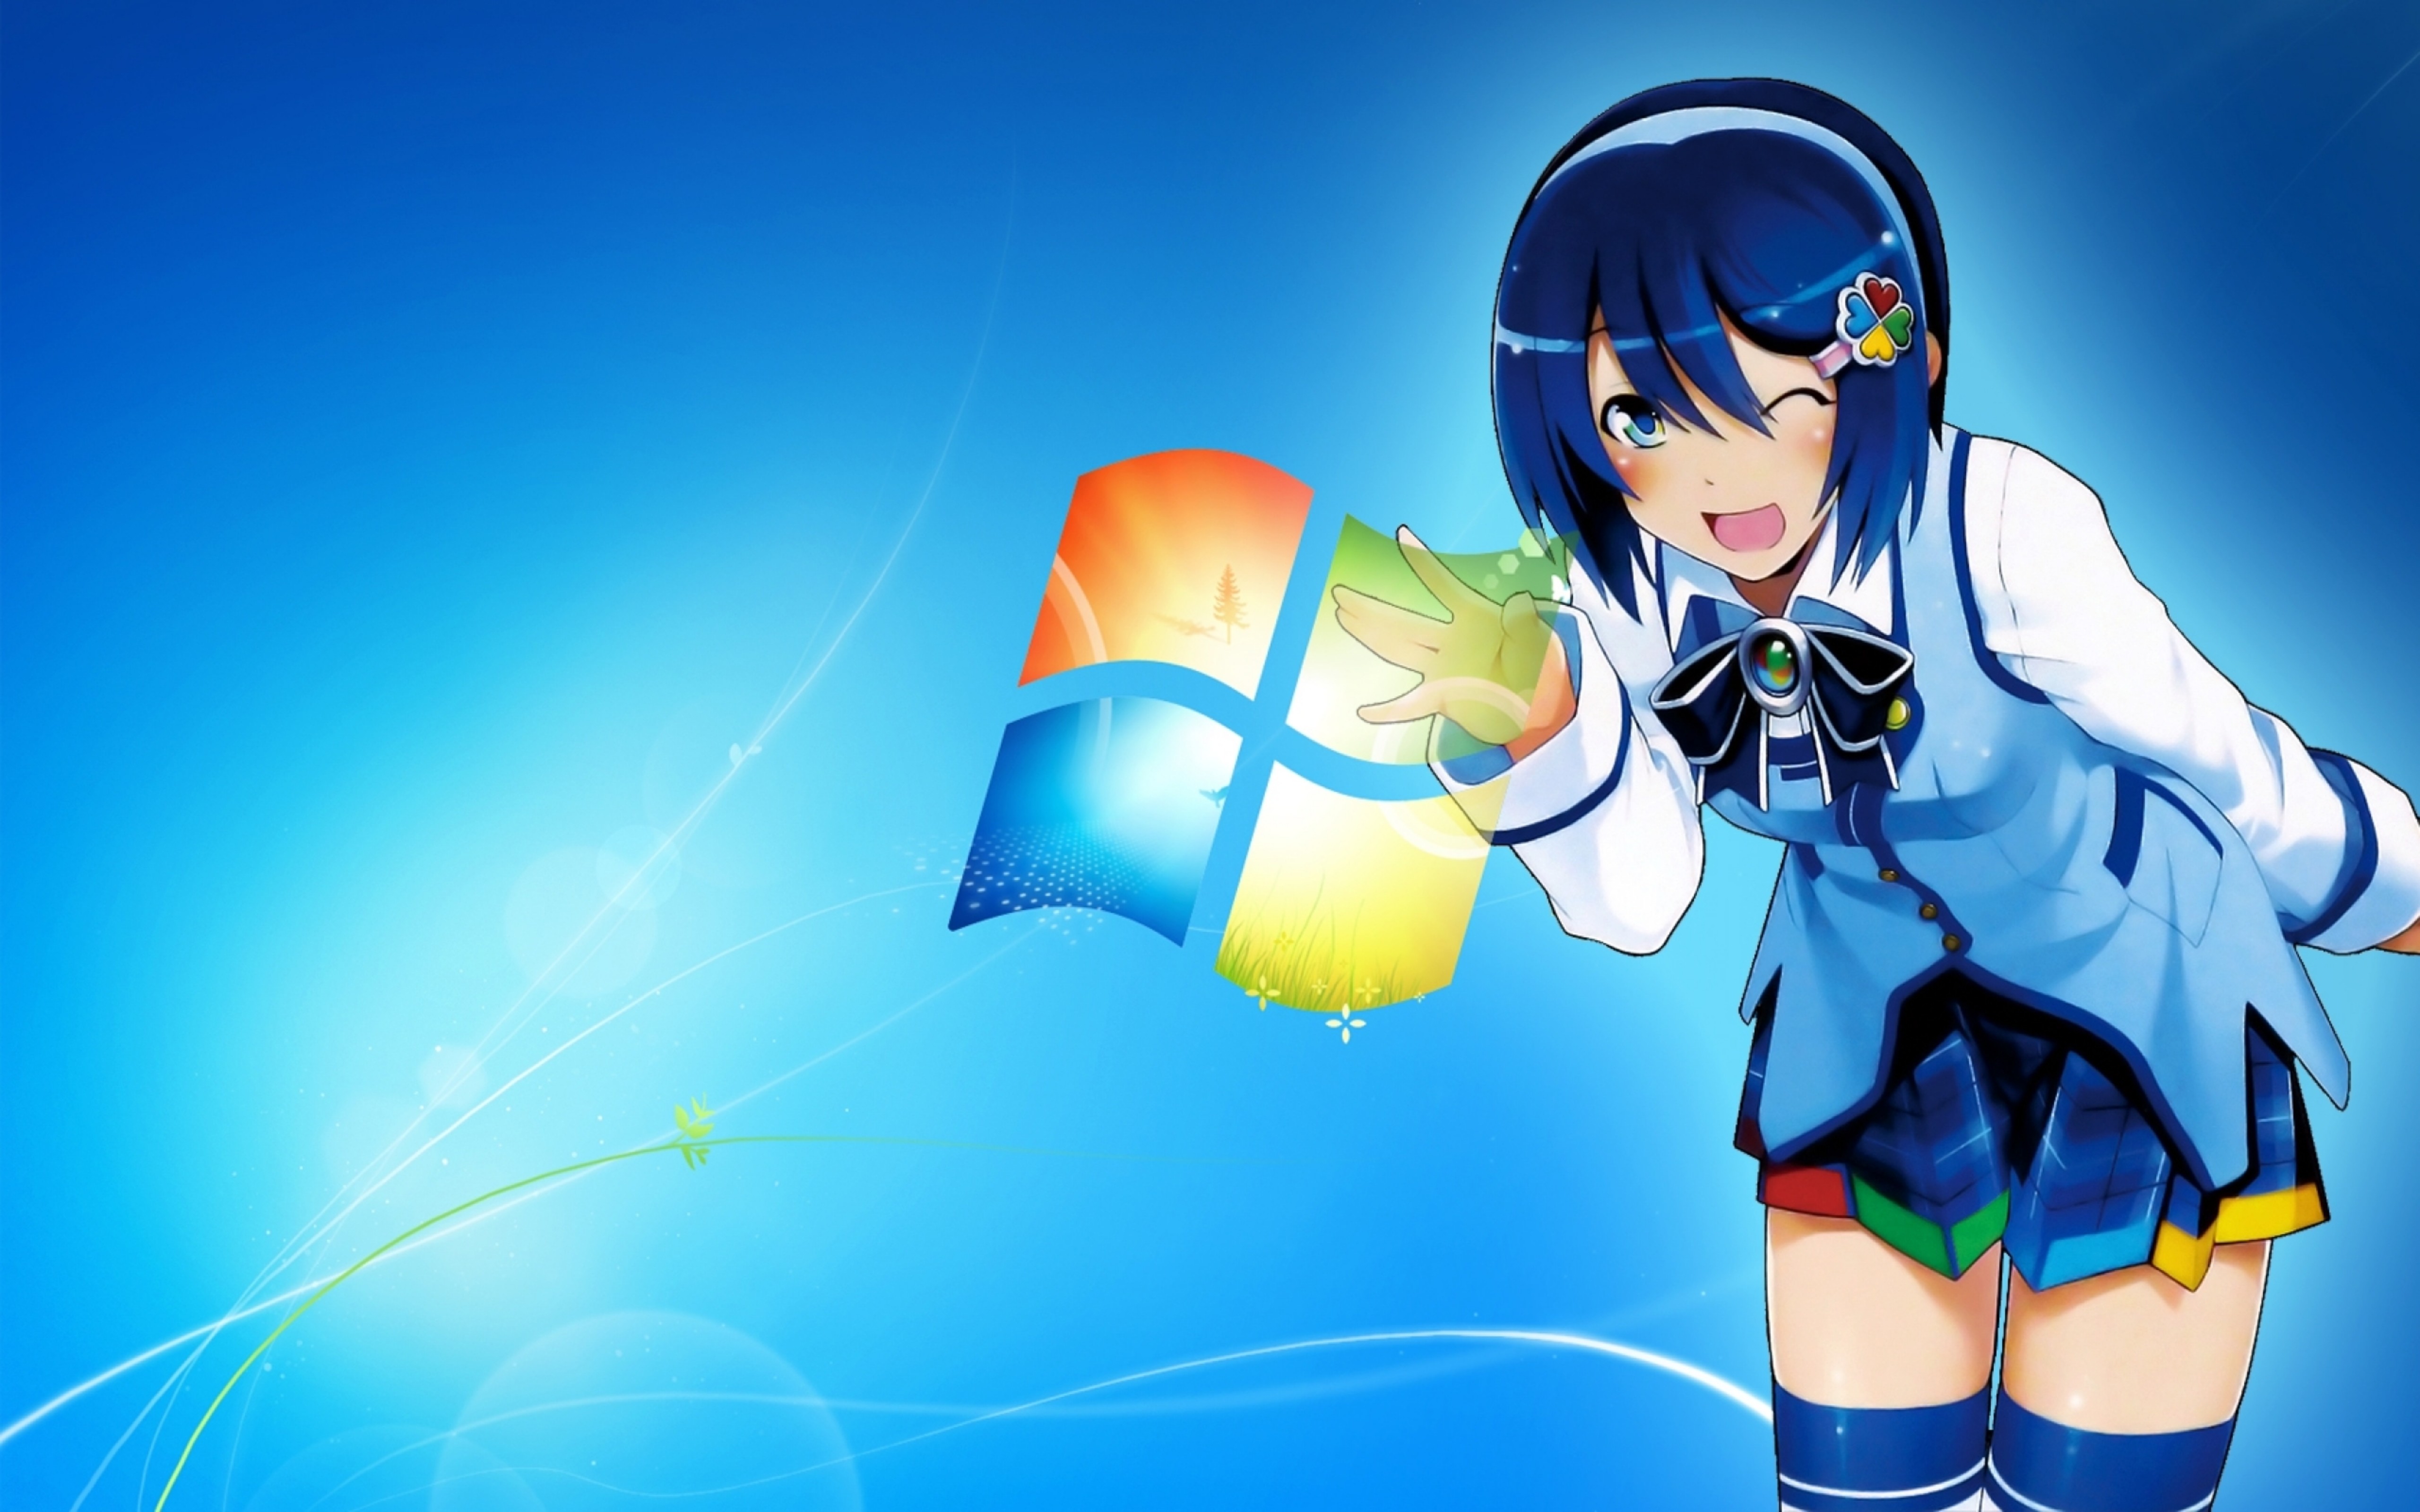 Download anime background wallpaper 3003apk for Android  apkdlin